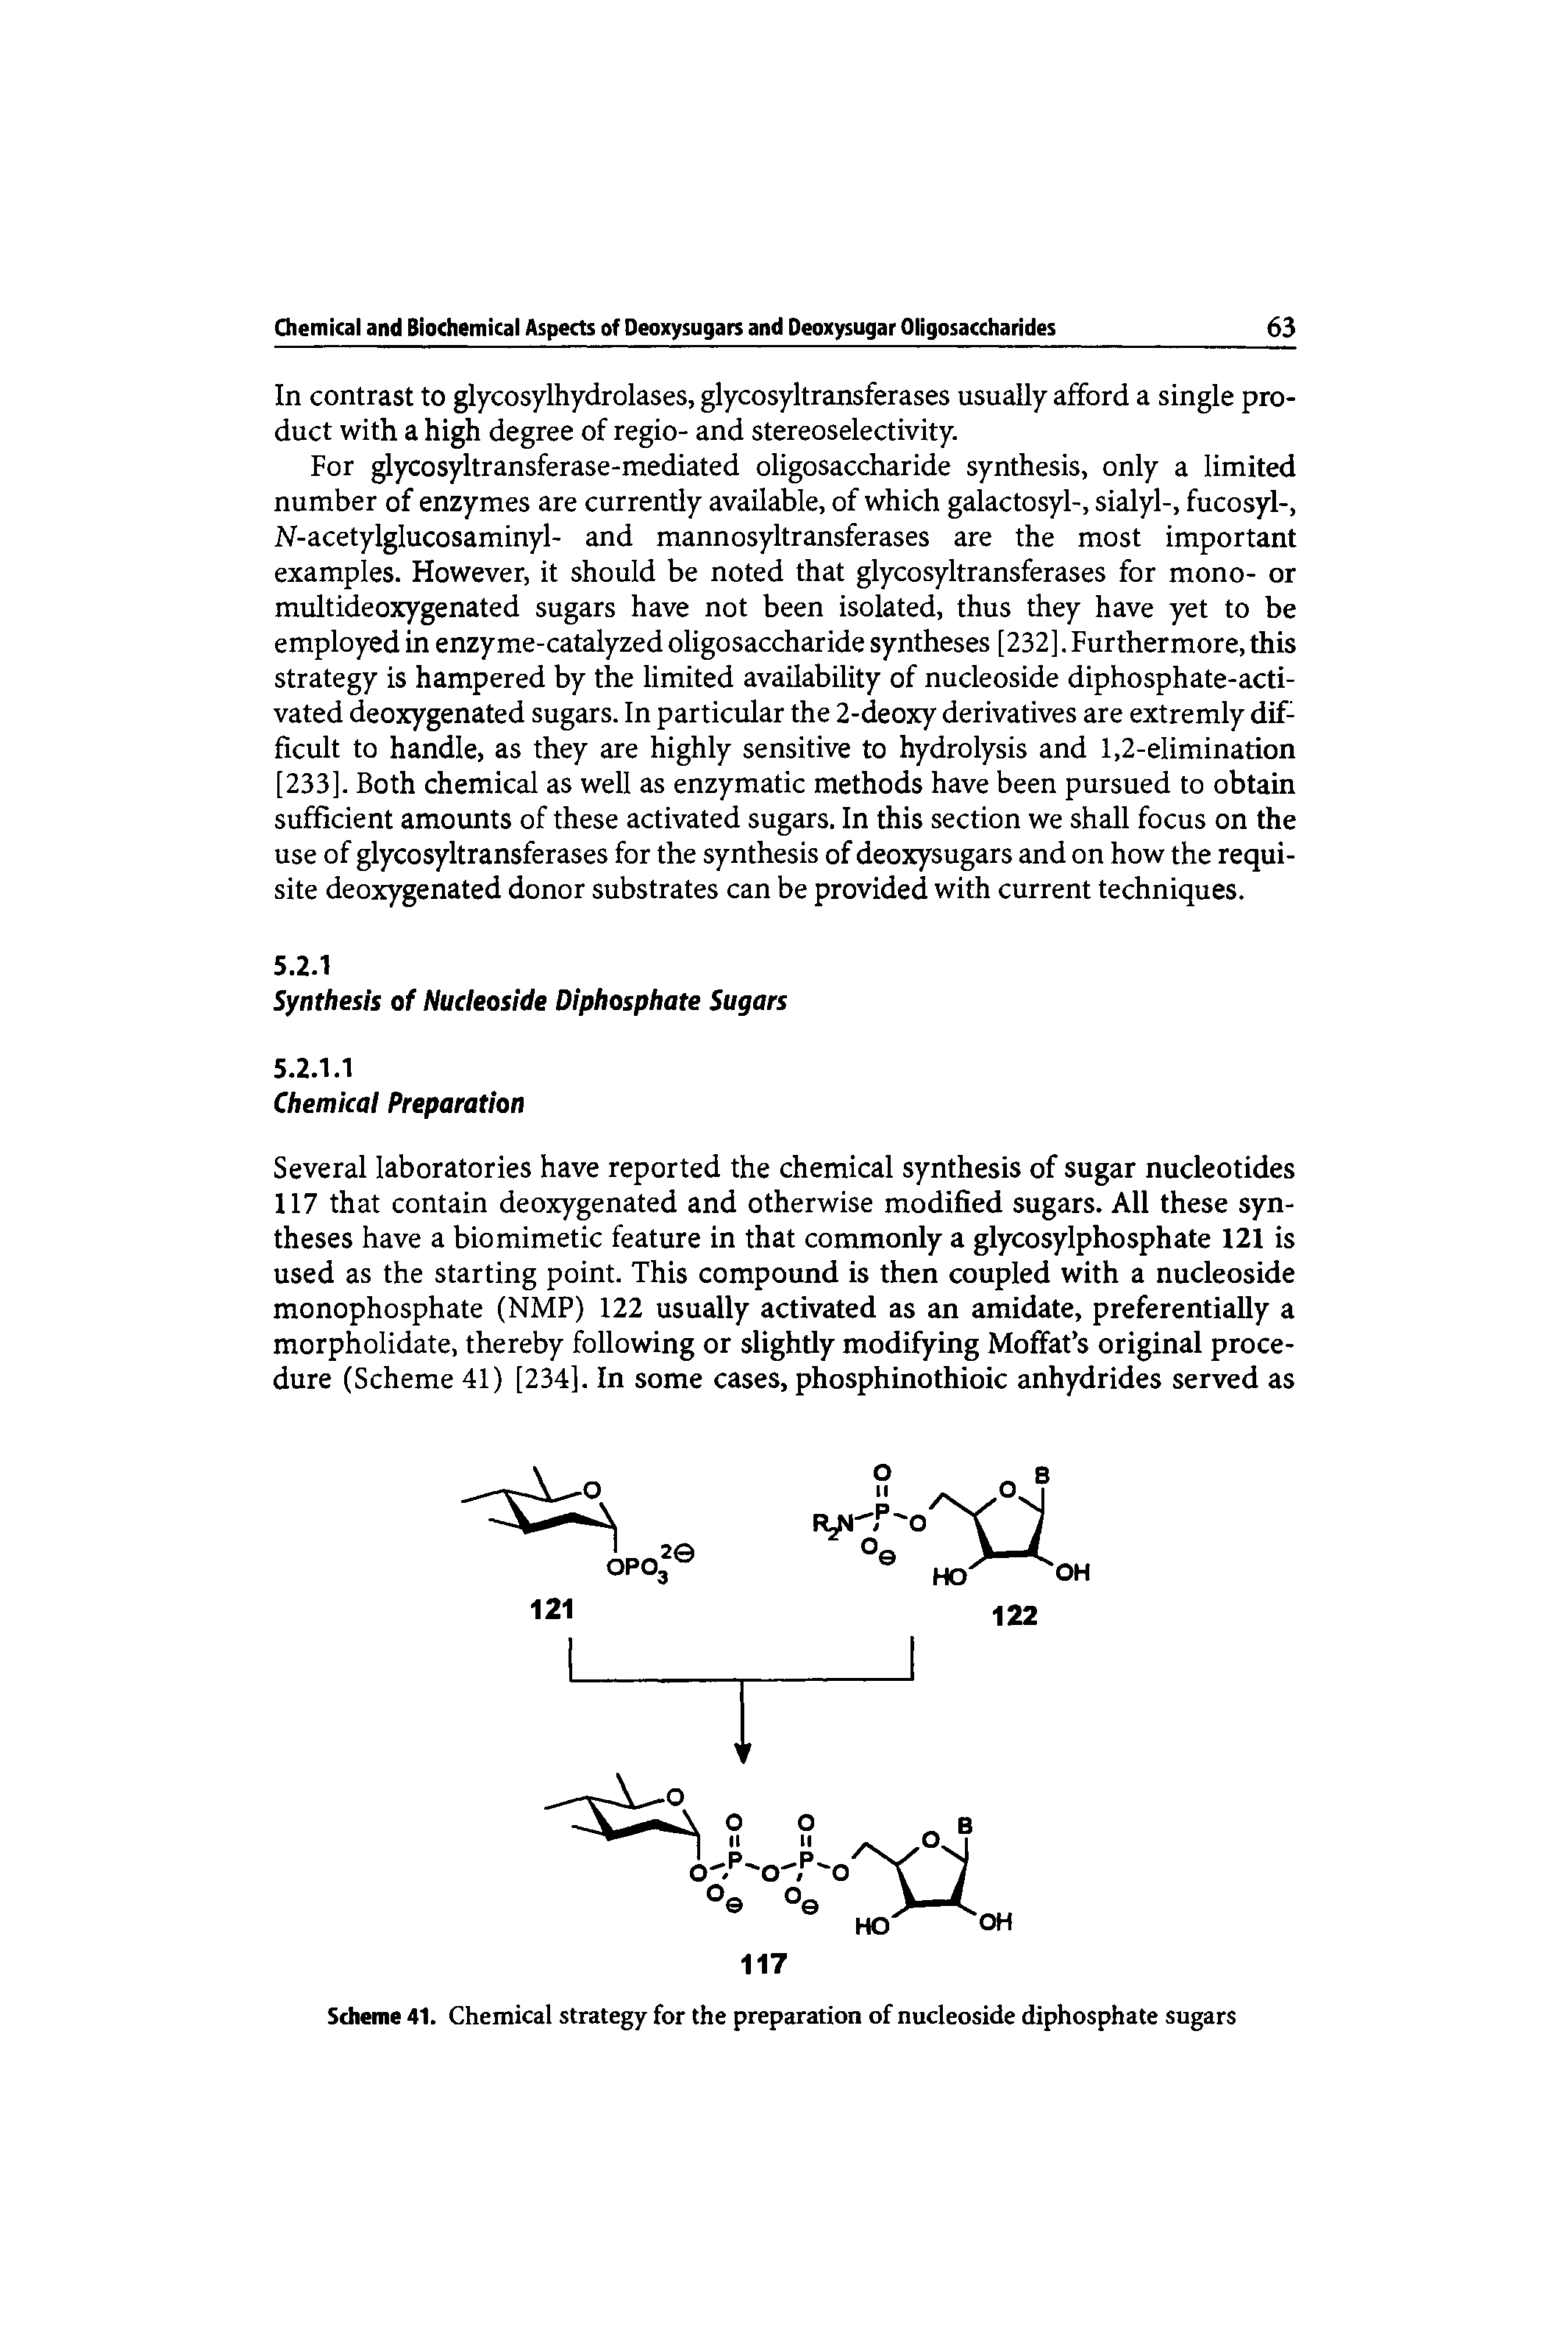 Scheme 41. Chemical strategy for the preparation of nucleoside diphosphate sugars...